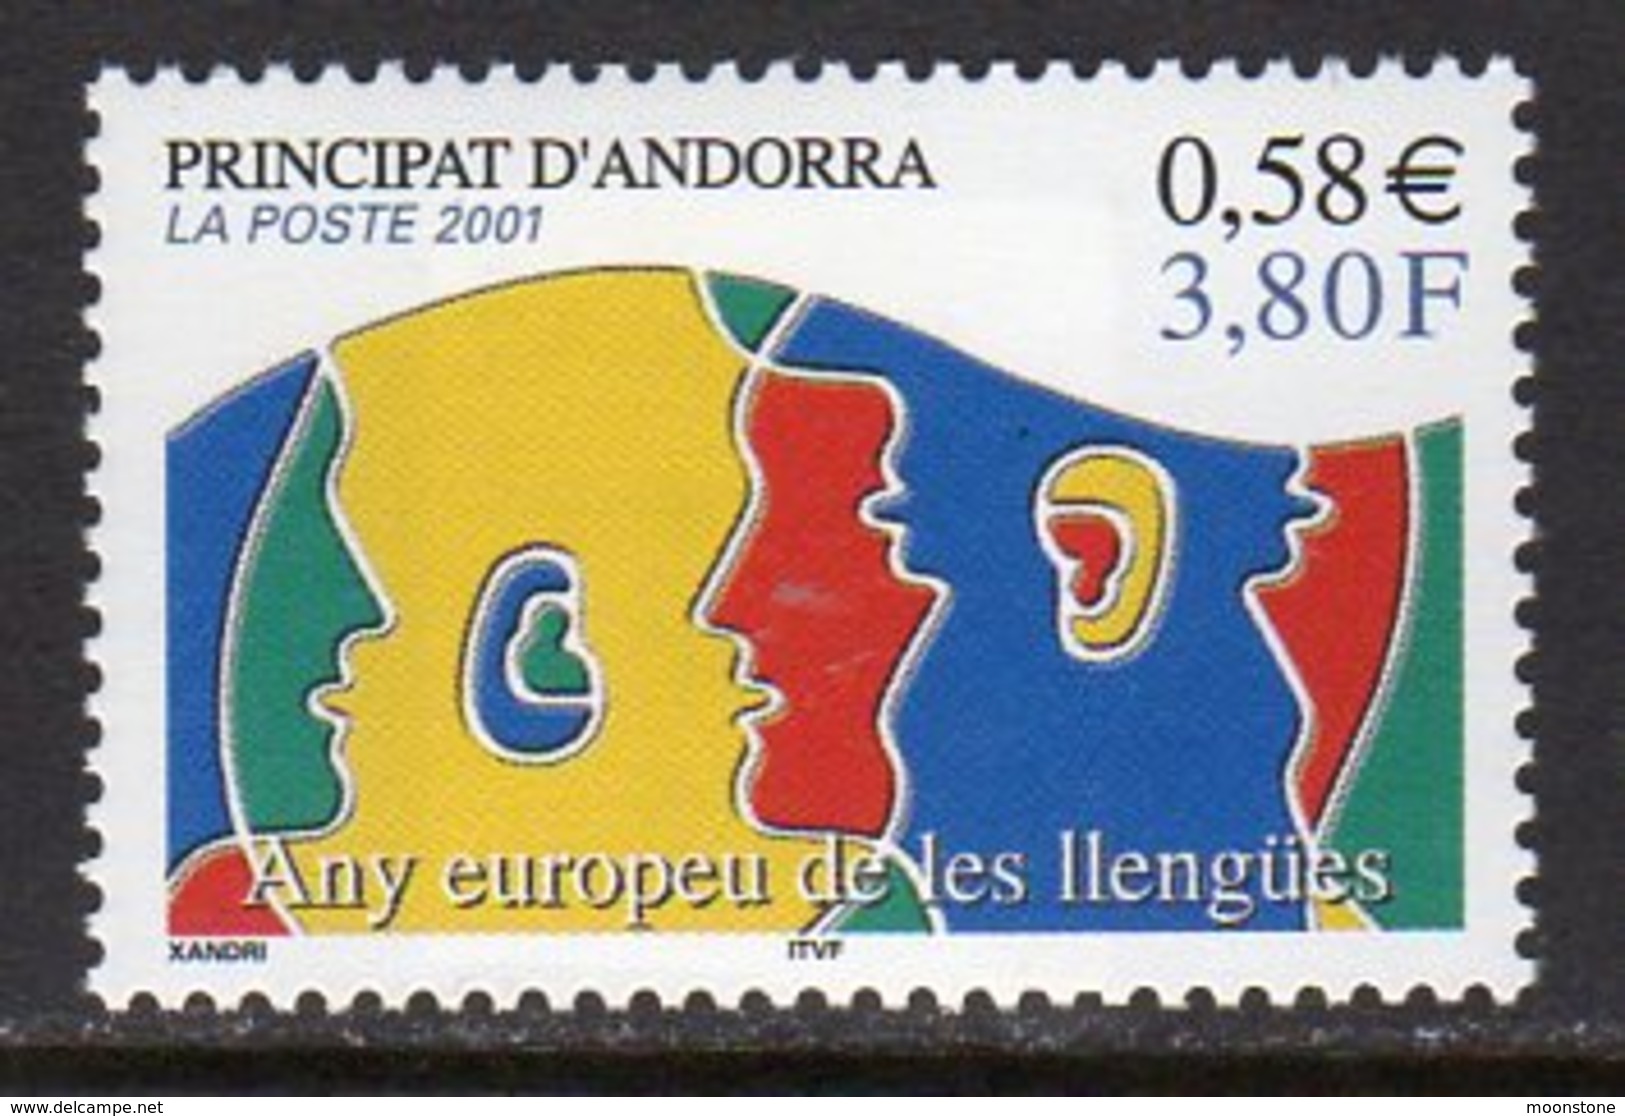 Andorra French 2001 European Languages Year, MNH (A) - Unused Stamps